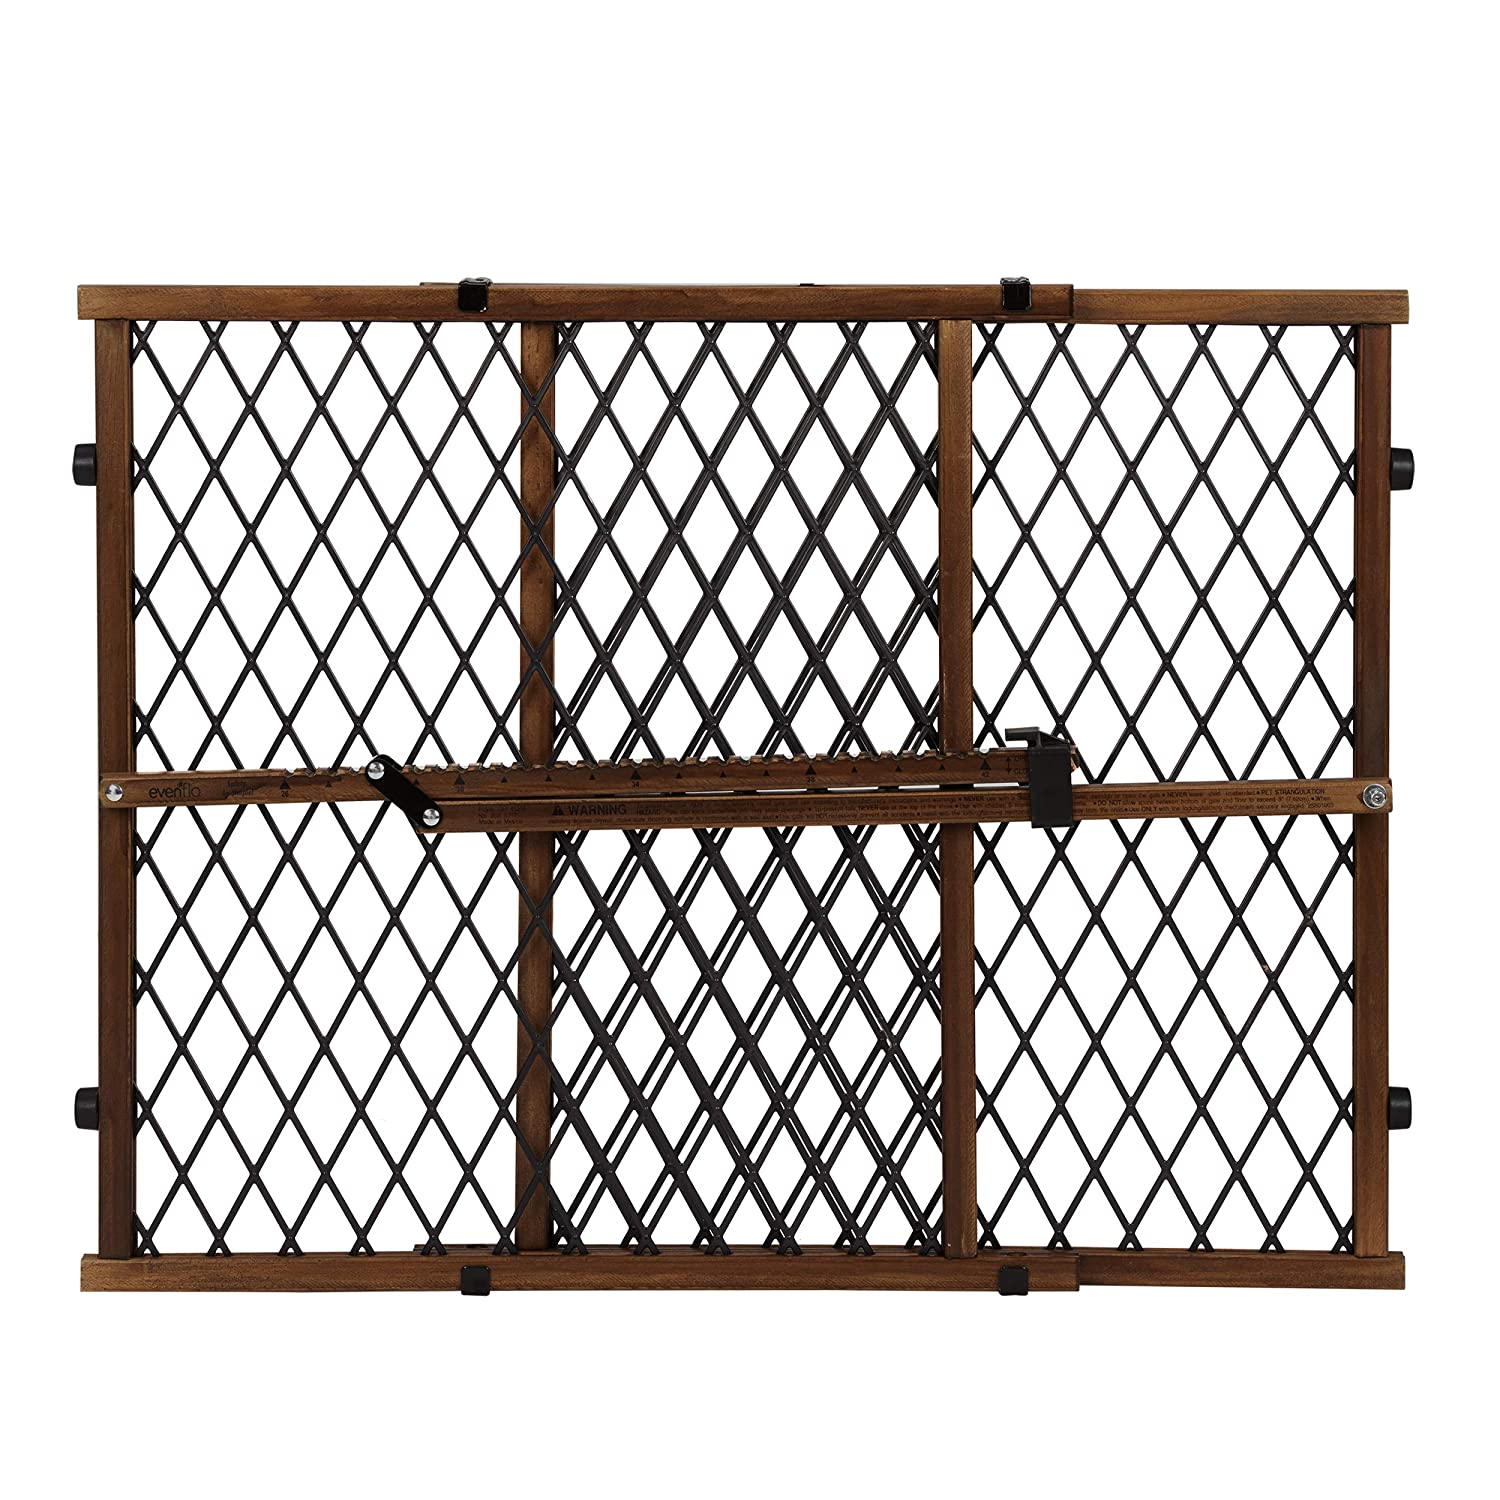 Position & Lock Baby Gate, Pressure-Mounted, Farmhouse Collection